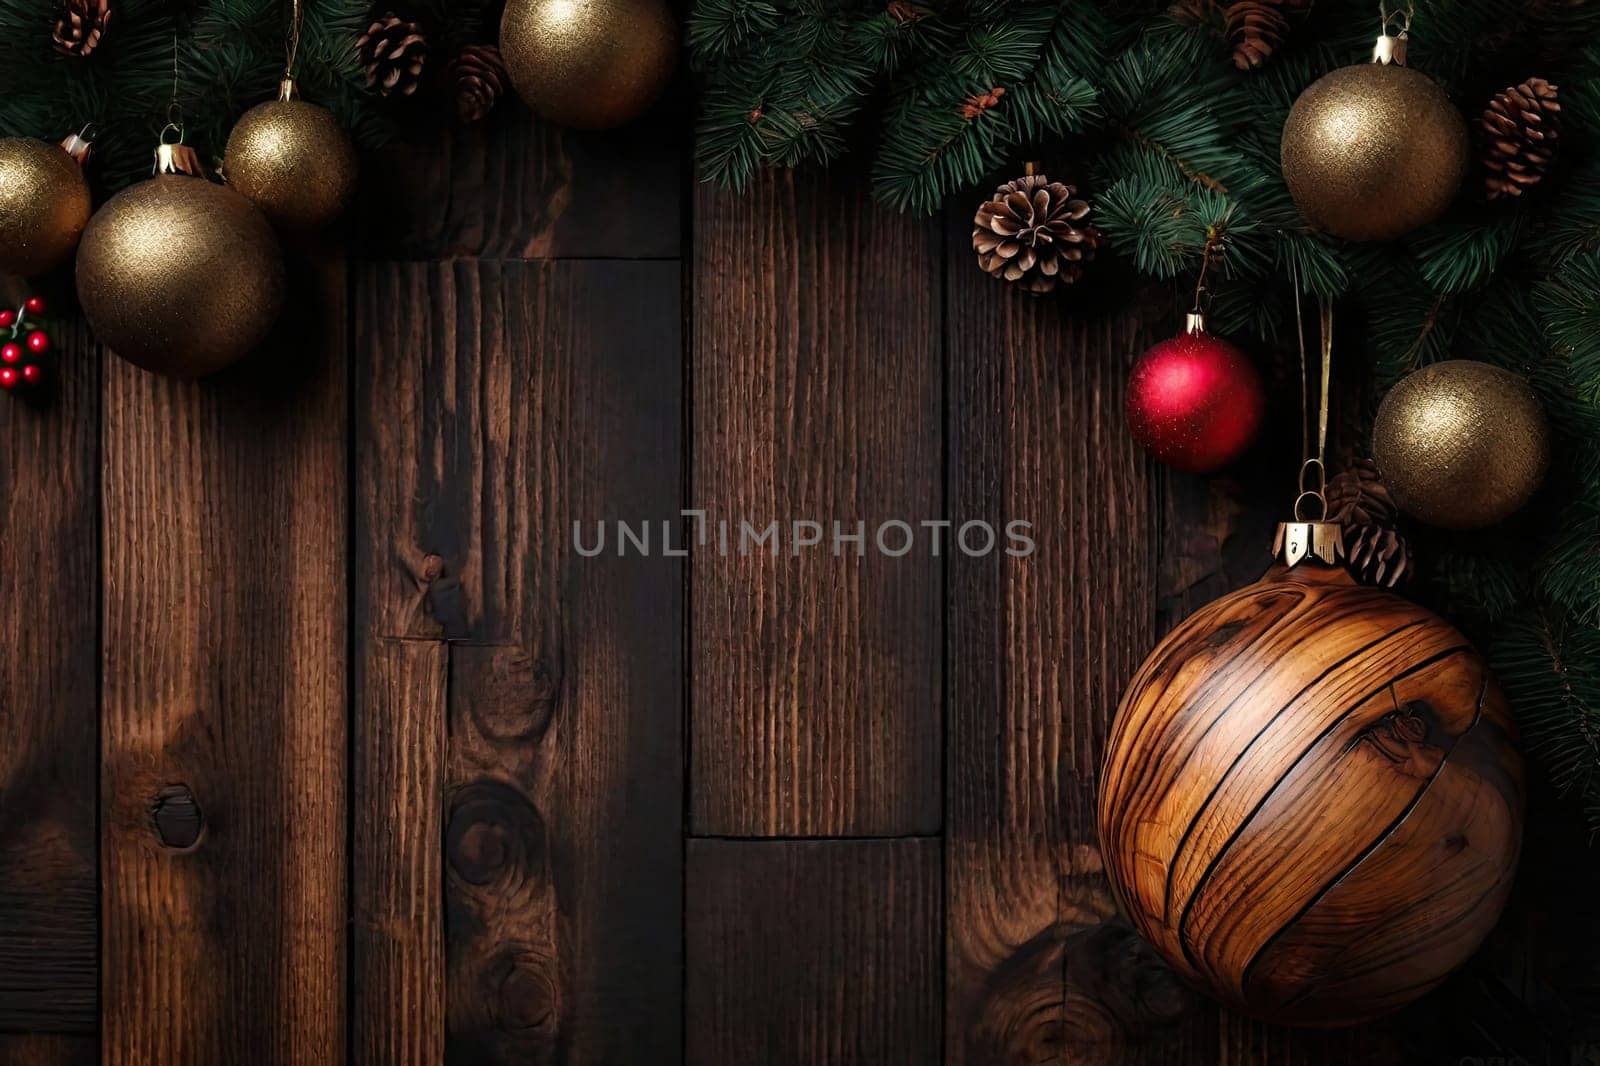 Christmas or New Year wooden background with baubles